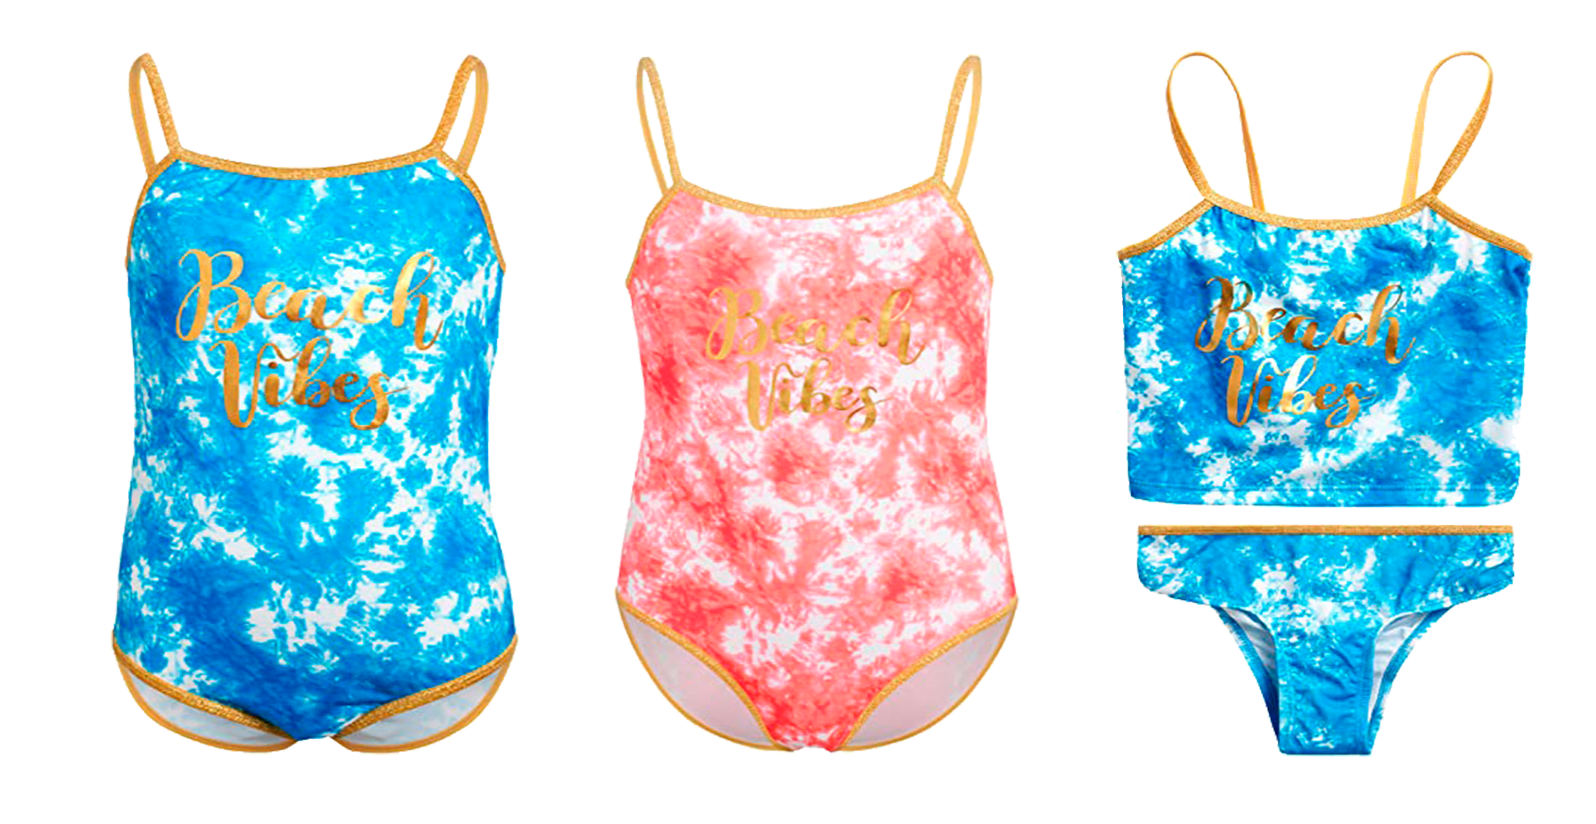 Toddler Girl's Two Tone One-Piece & Two-Piece Swimsuits w/ Embroidered GOLD Graphics - Tie-Dye Print